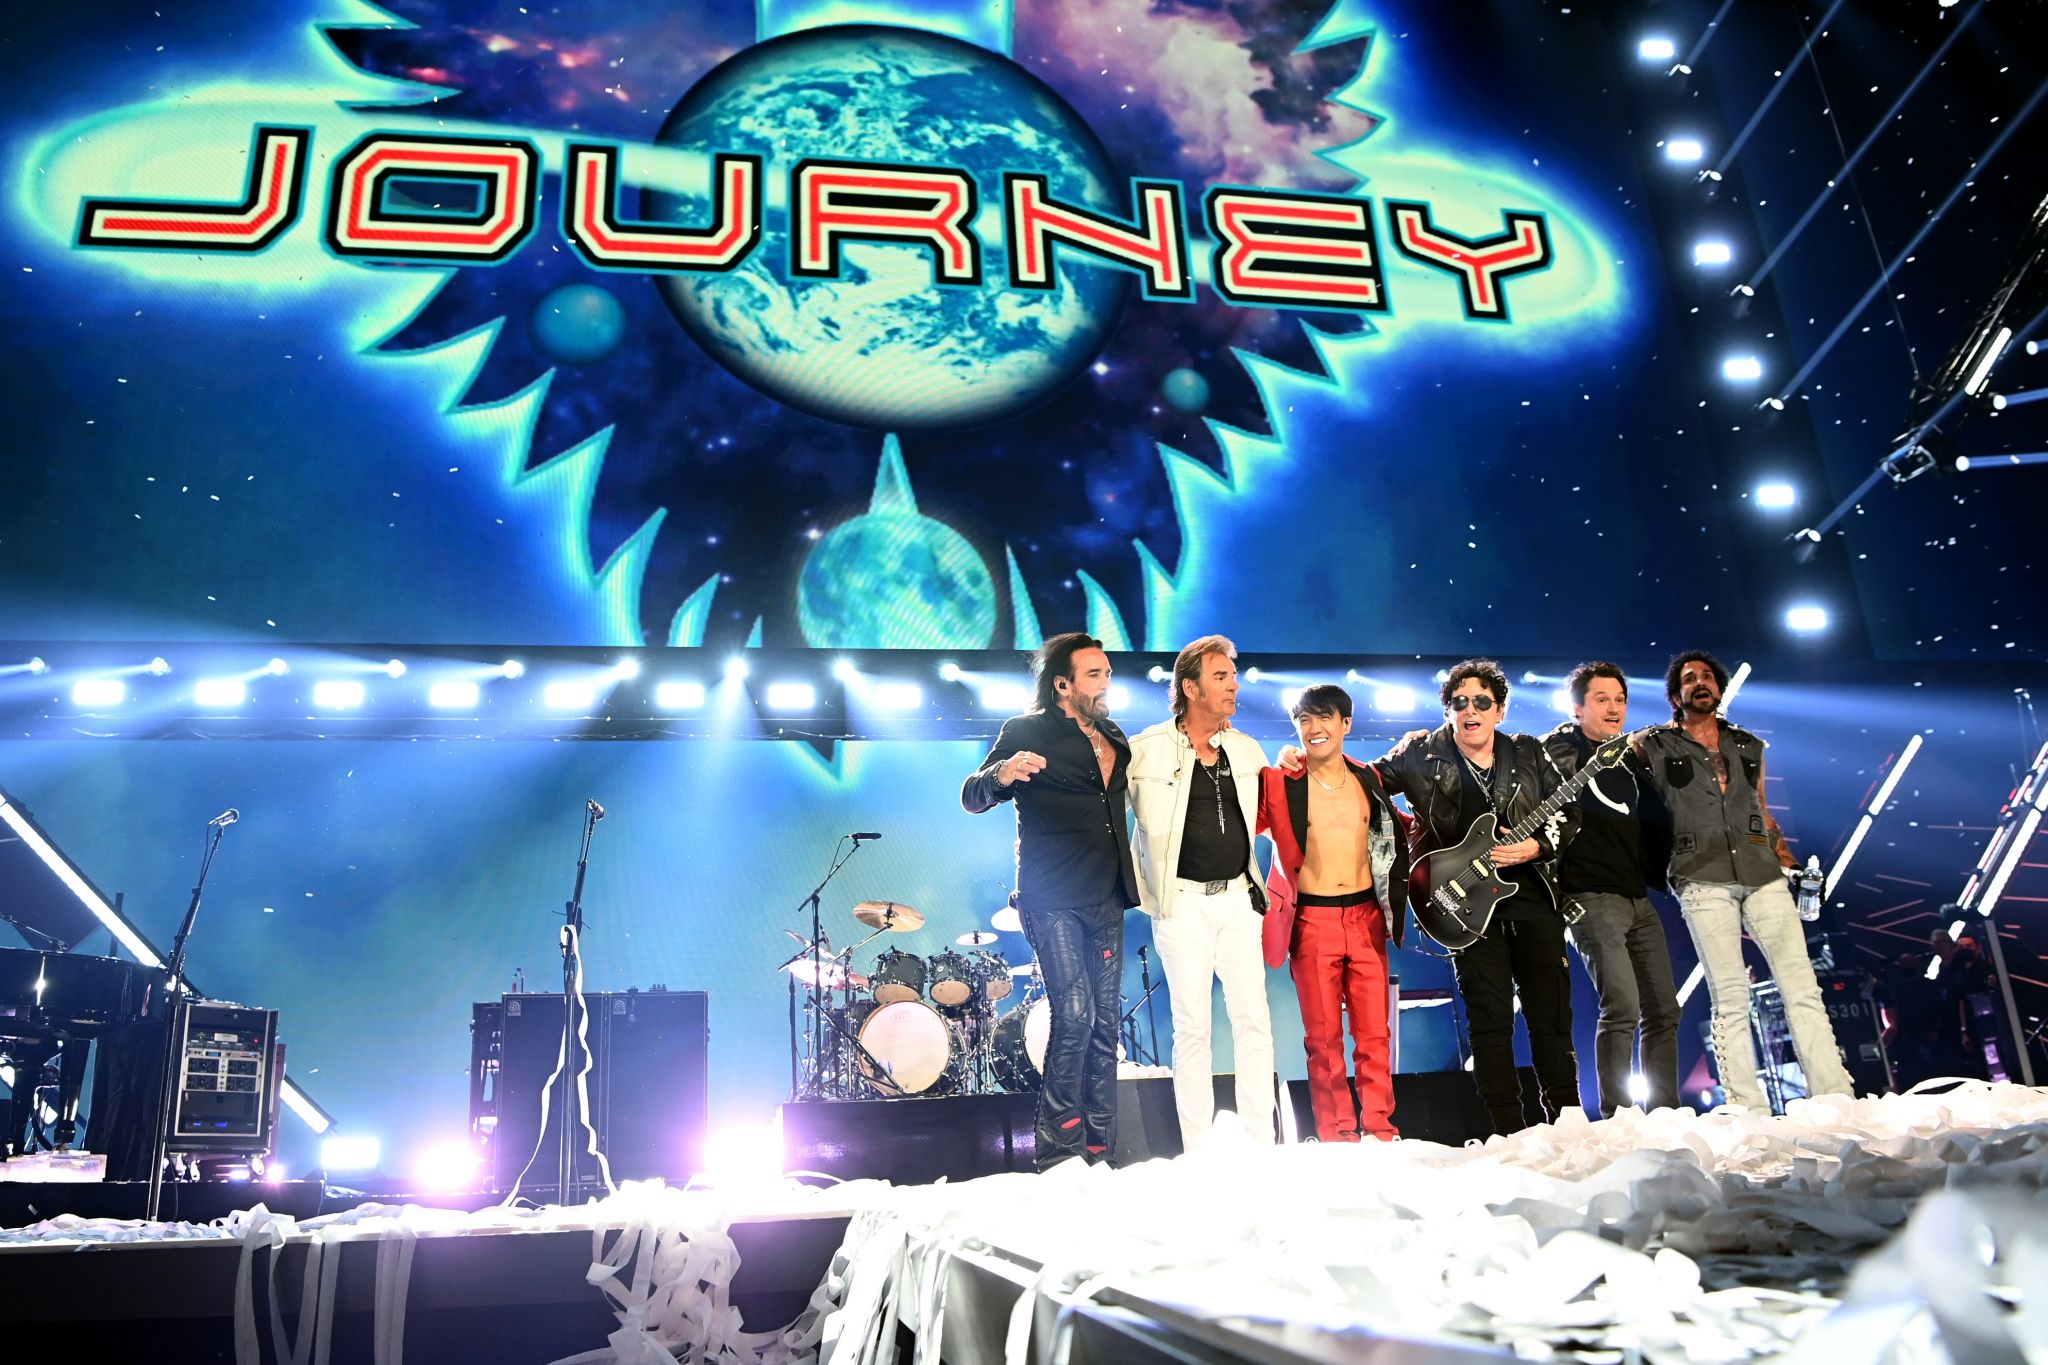 Journey, Toto heading to CT for 2022 'Freedom Tour'